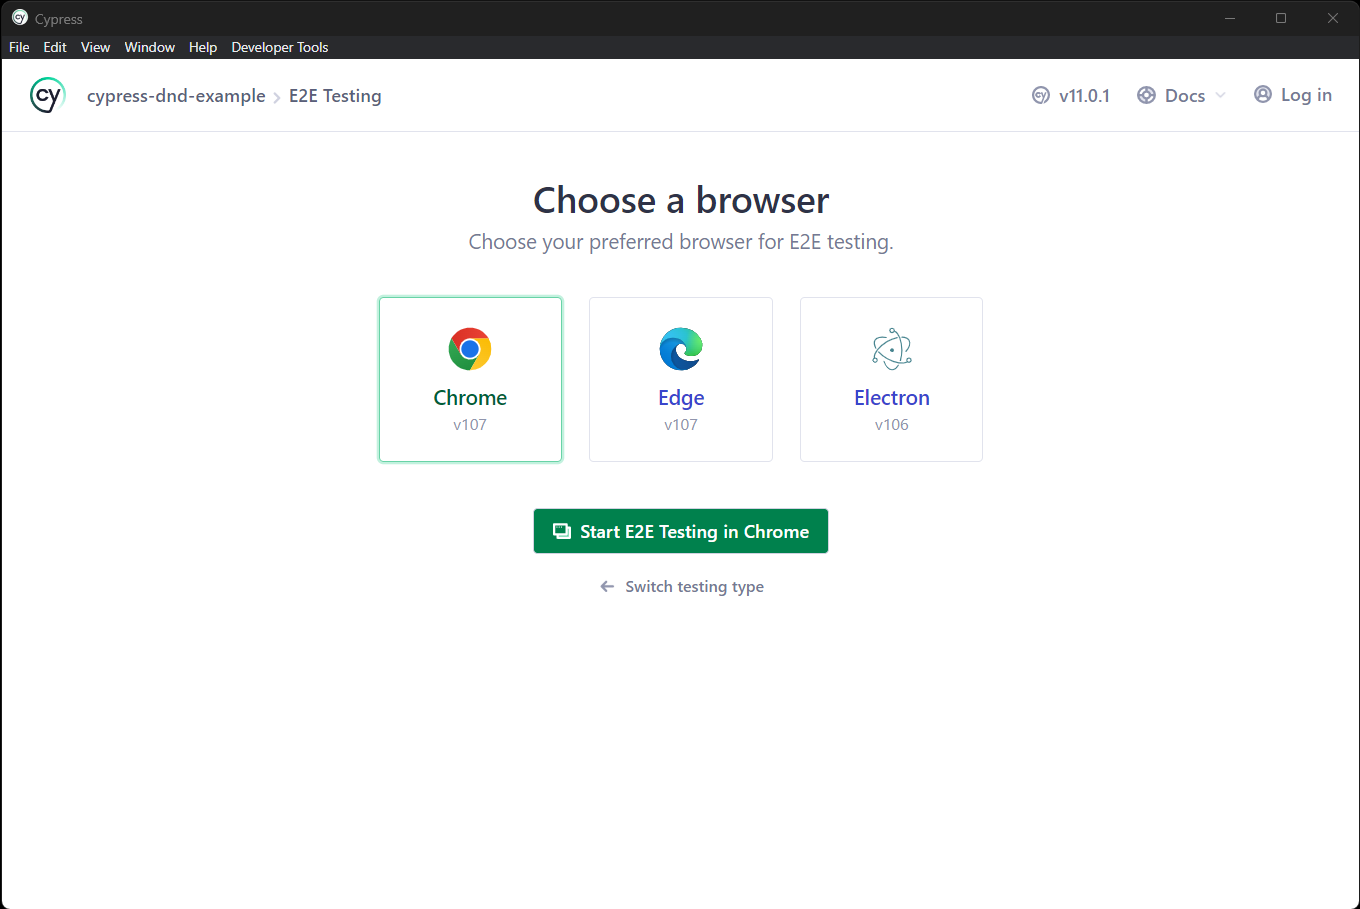 The Cypress browser selection screen